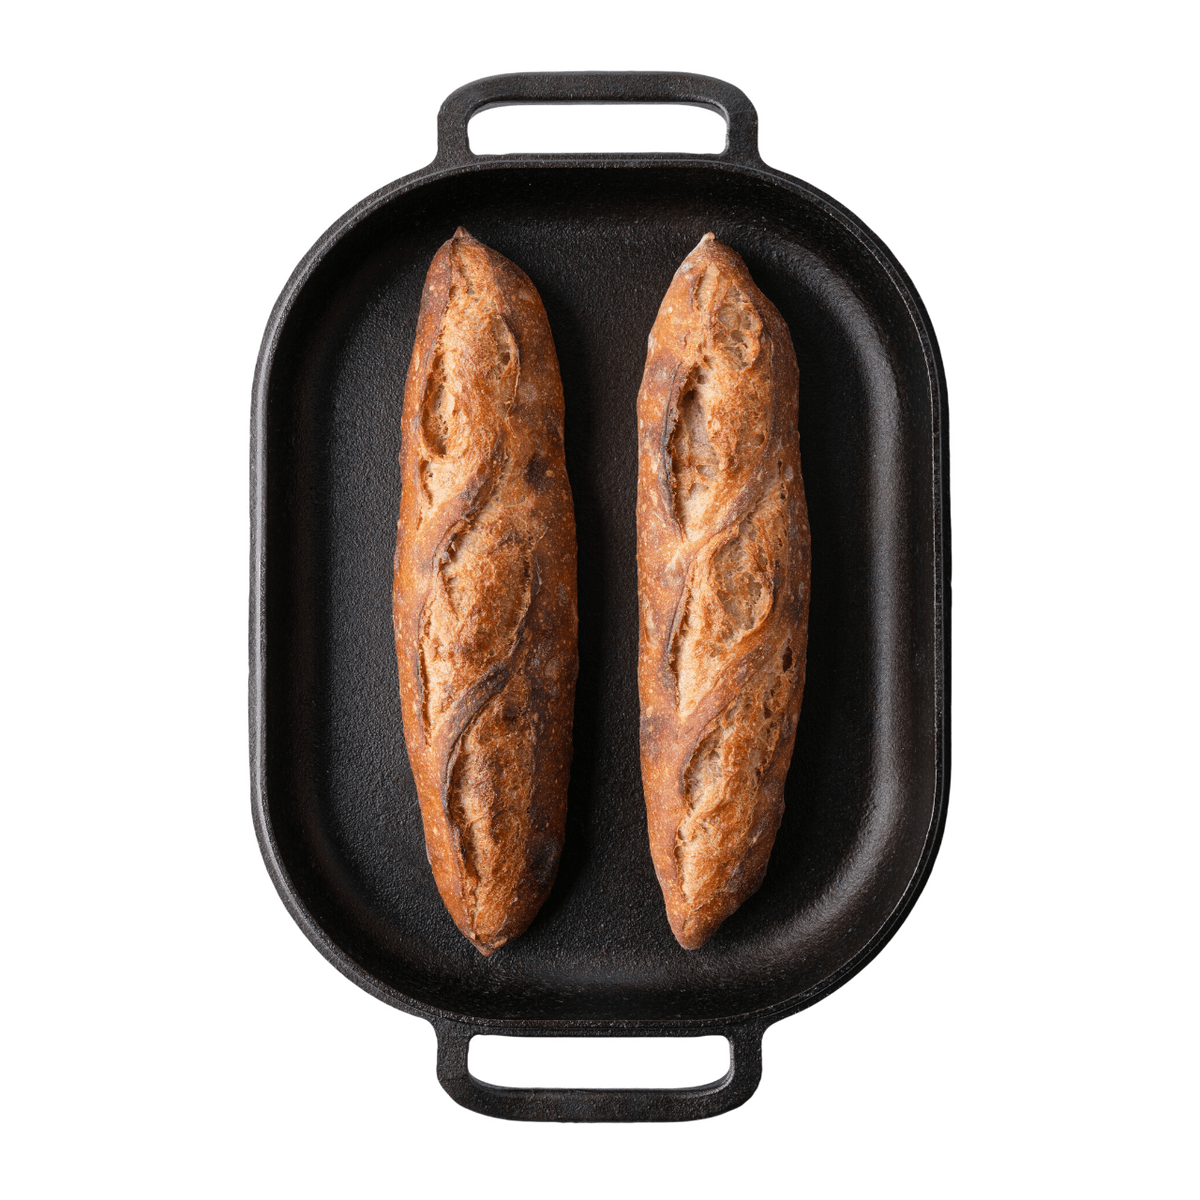 Product - Challenger Breadware